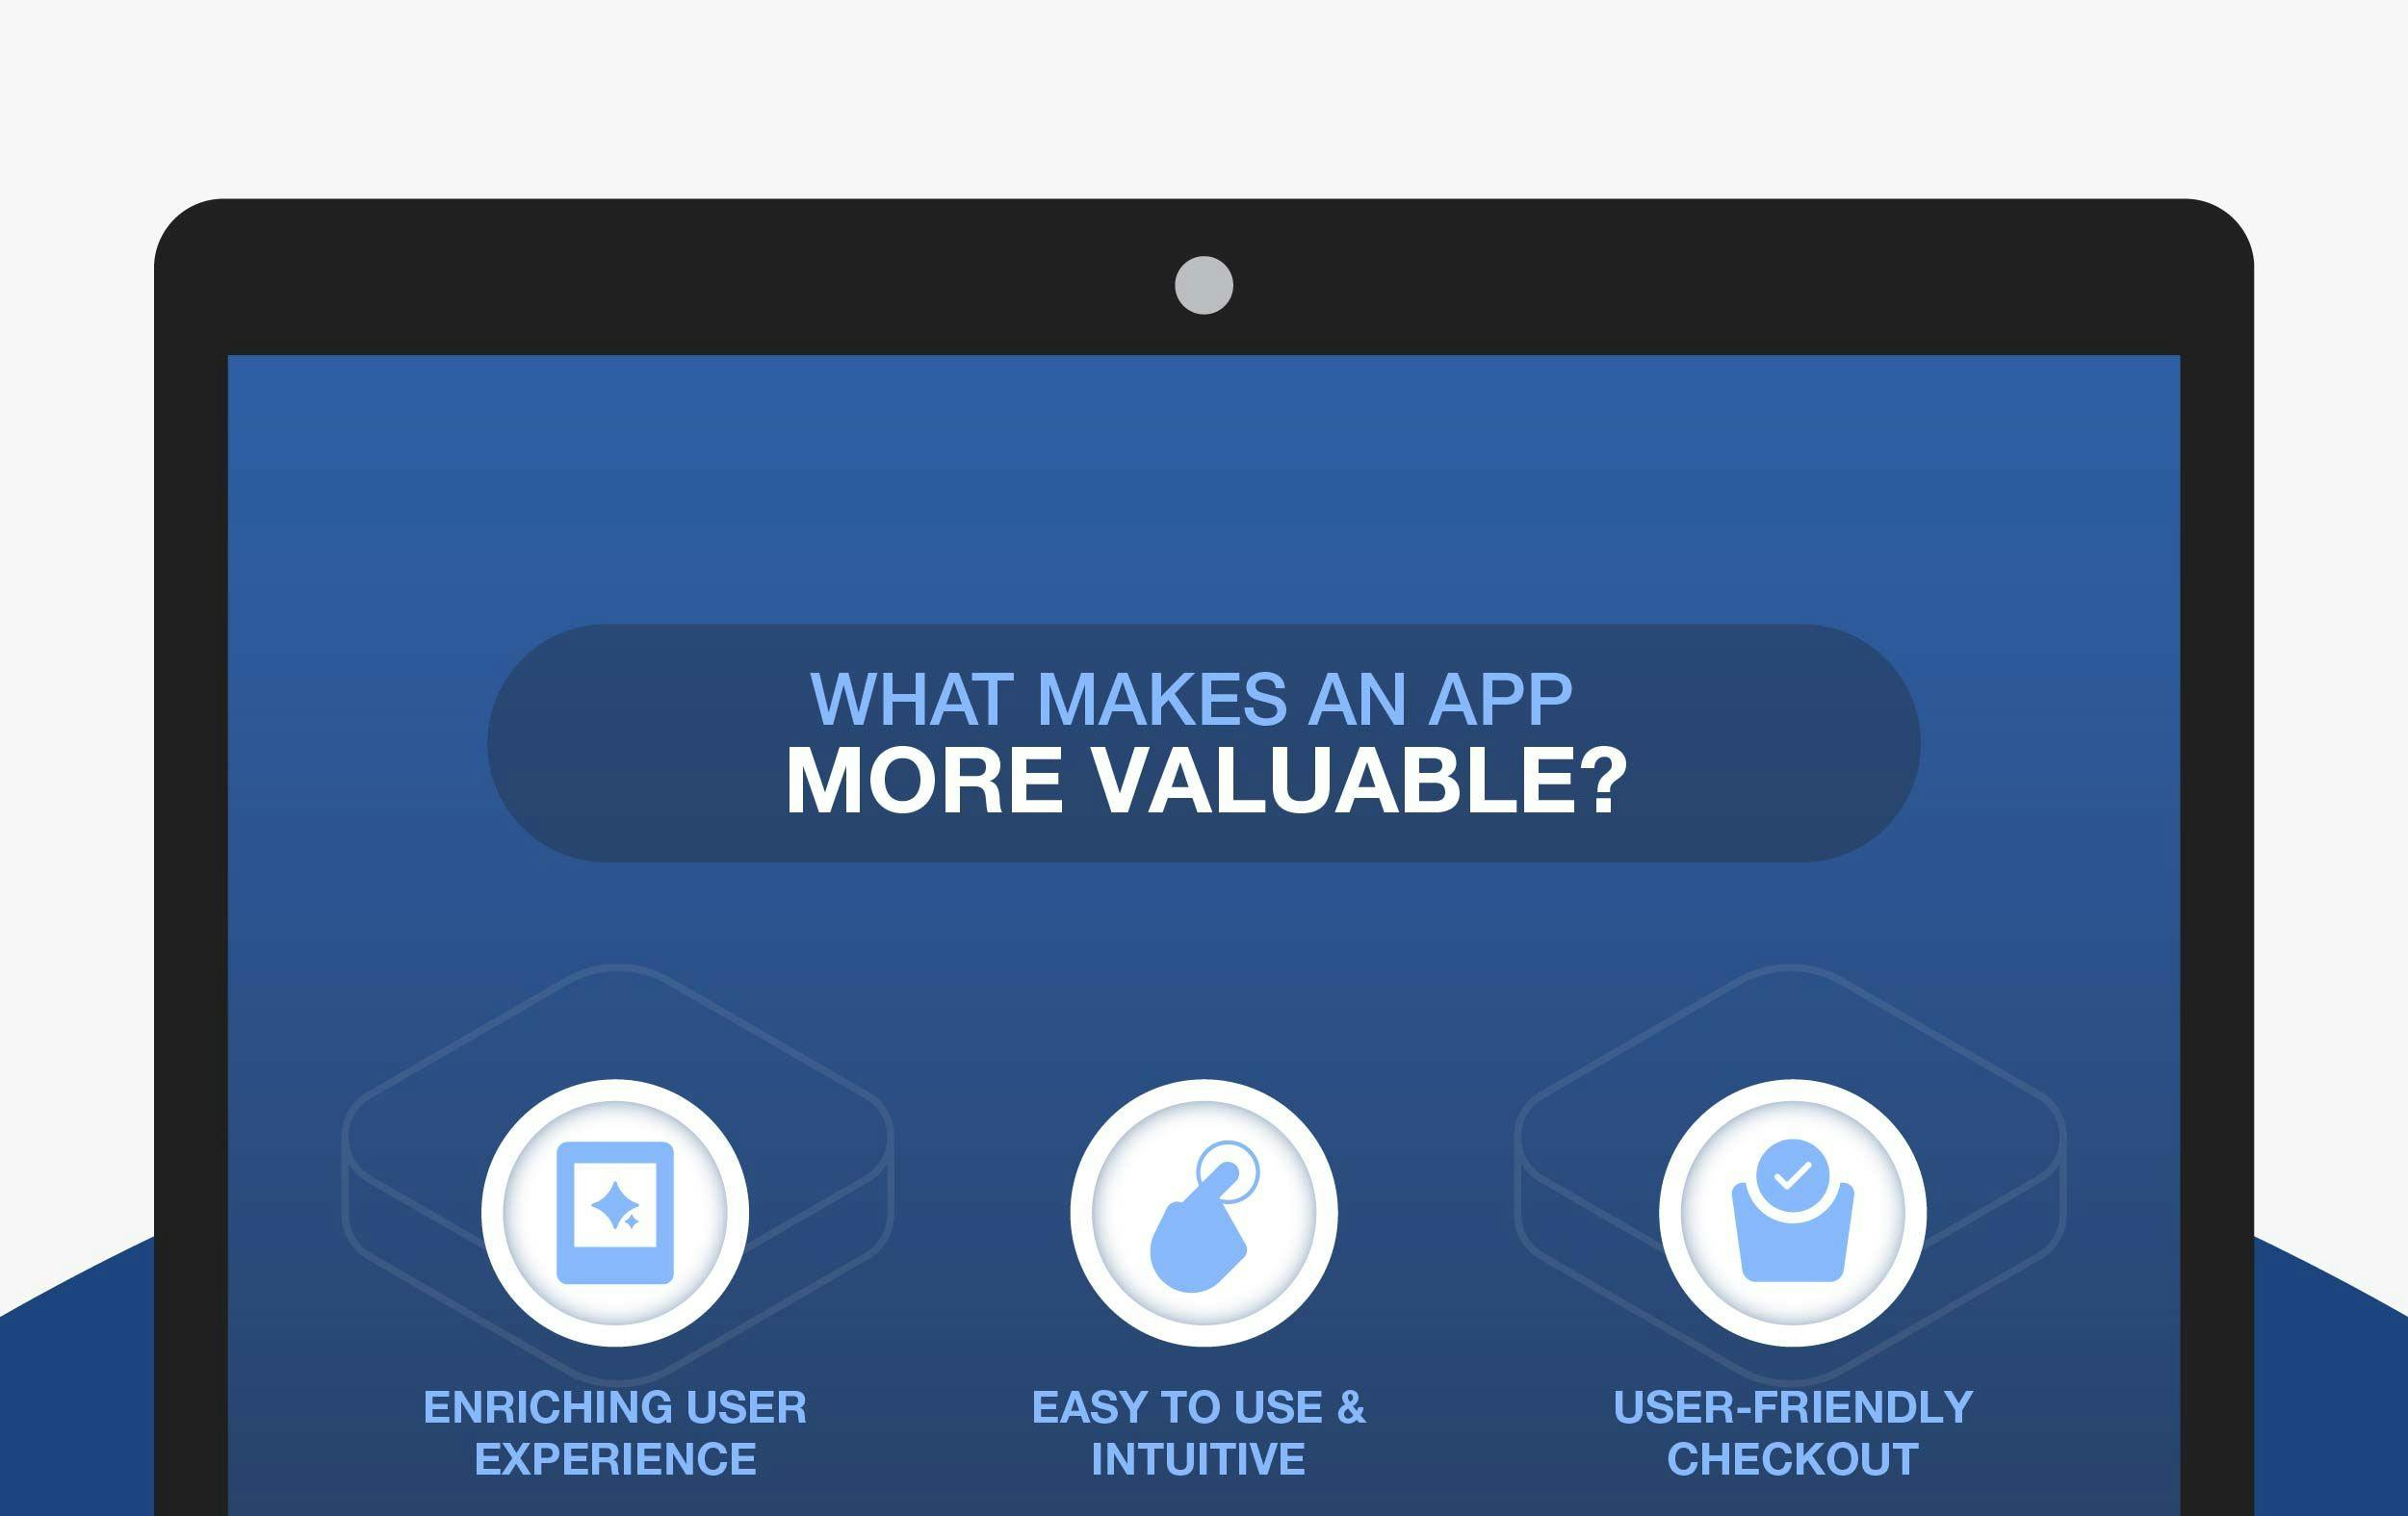 How to Value an App? What Makes an App Valuable?